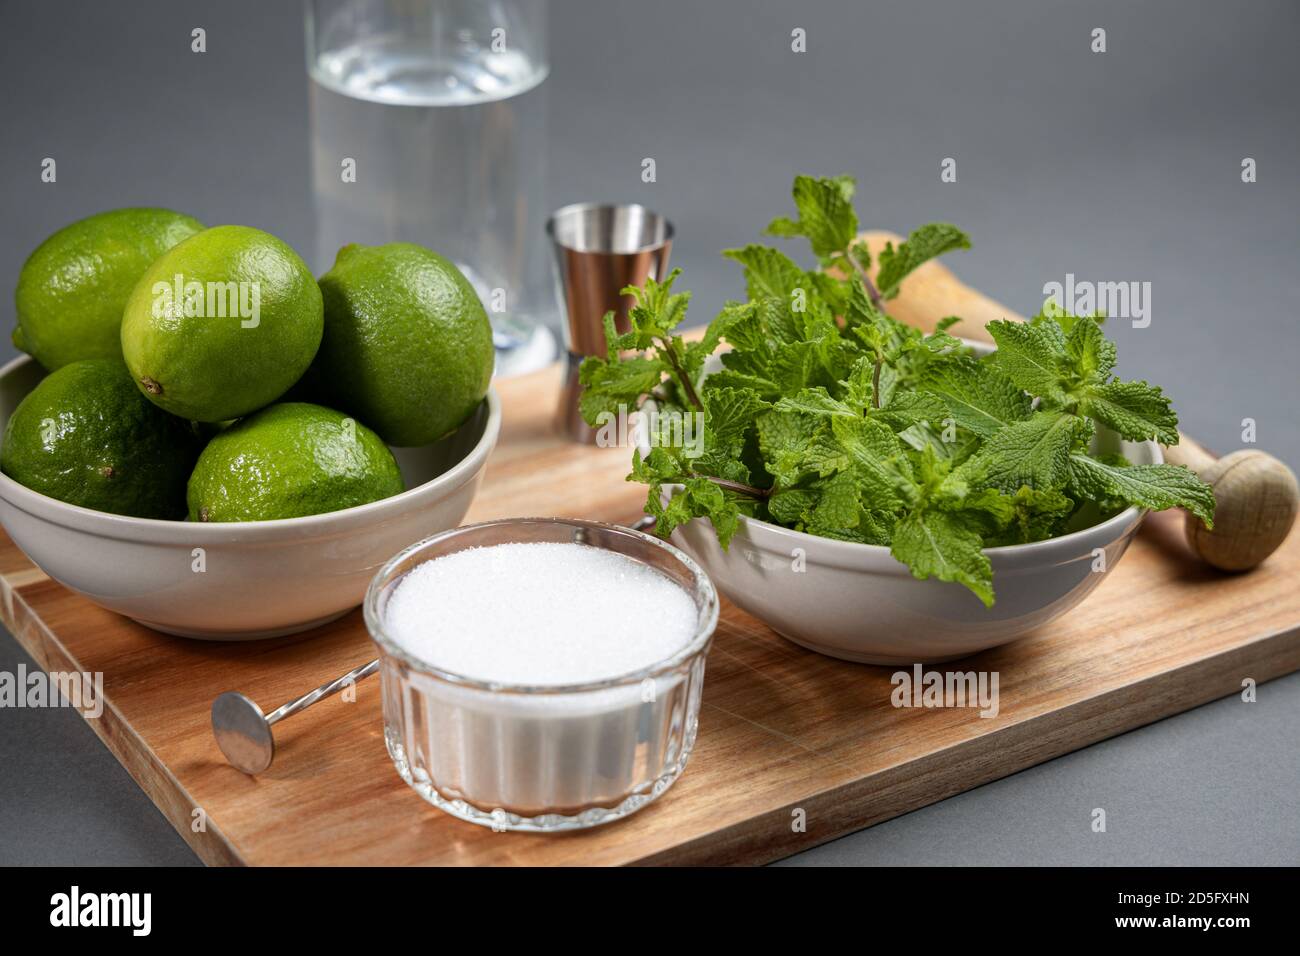 Mojito cocktail ingredients and tools on wooden cutting board Stock Photo